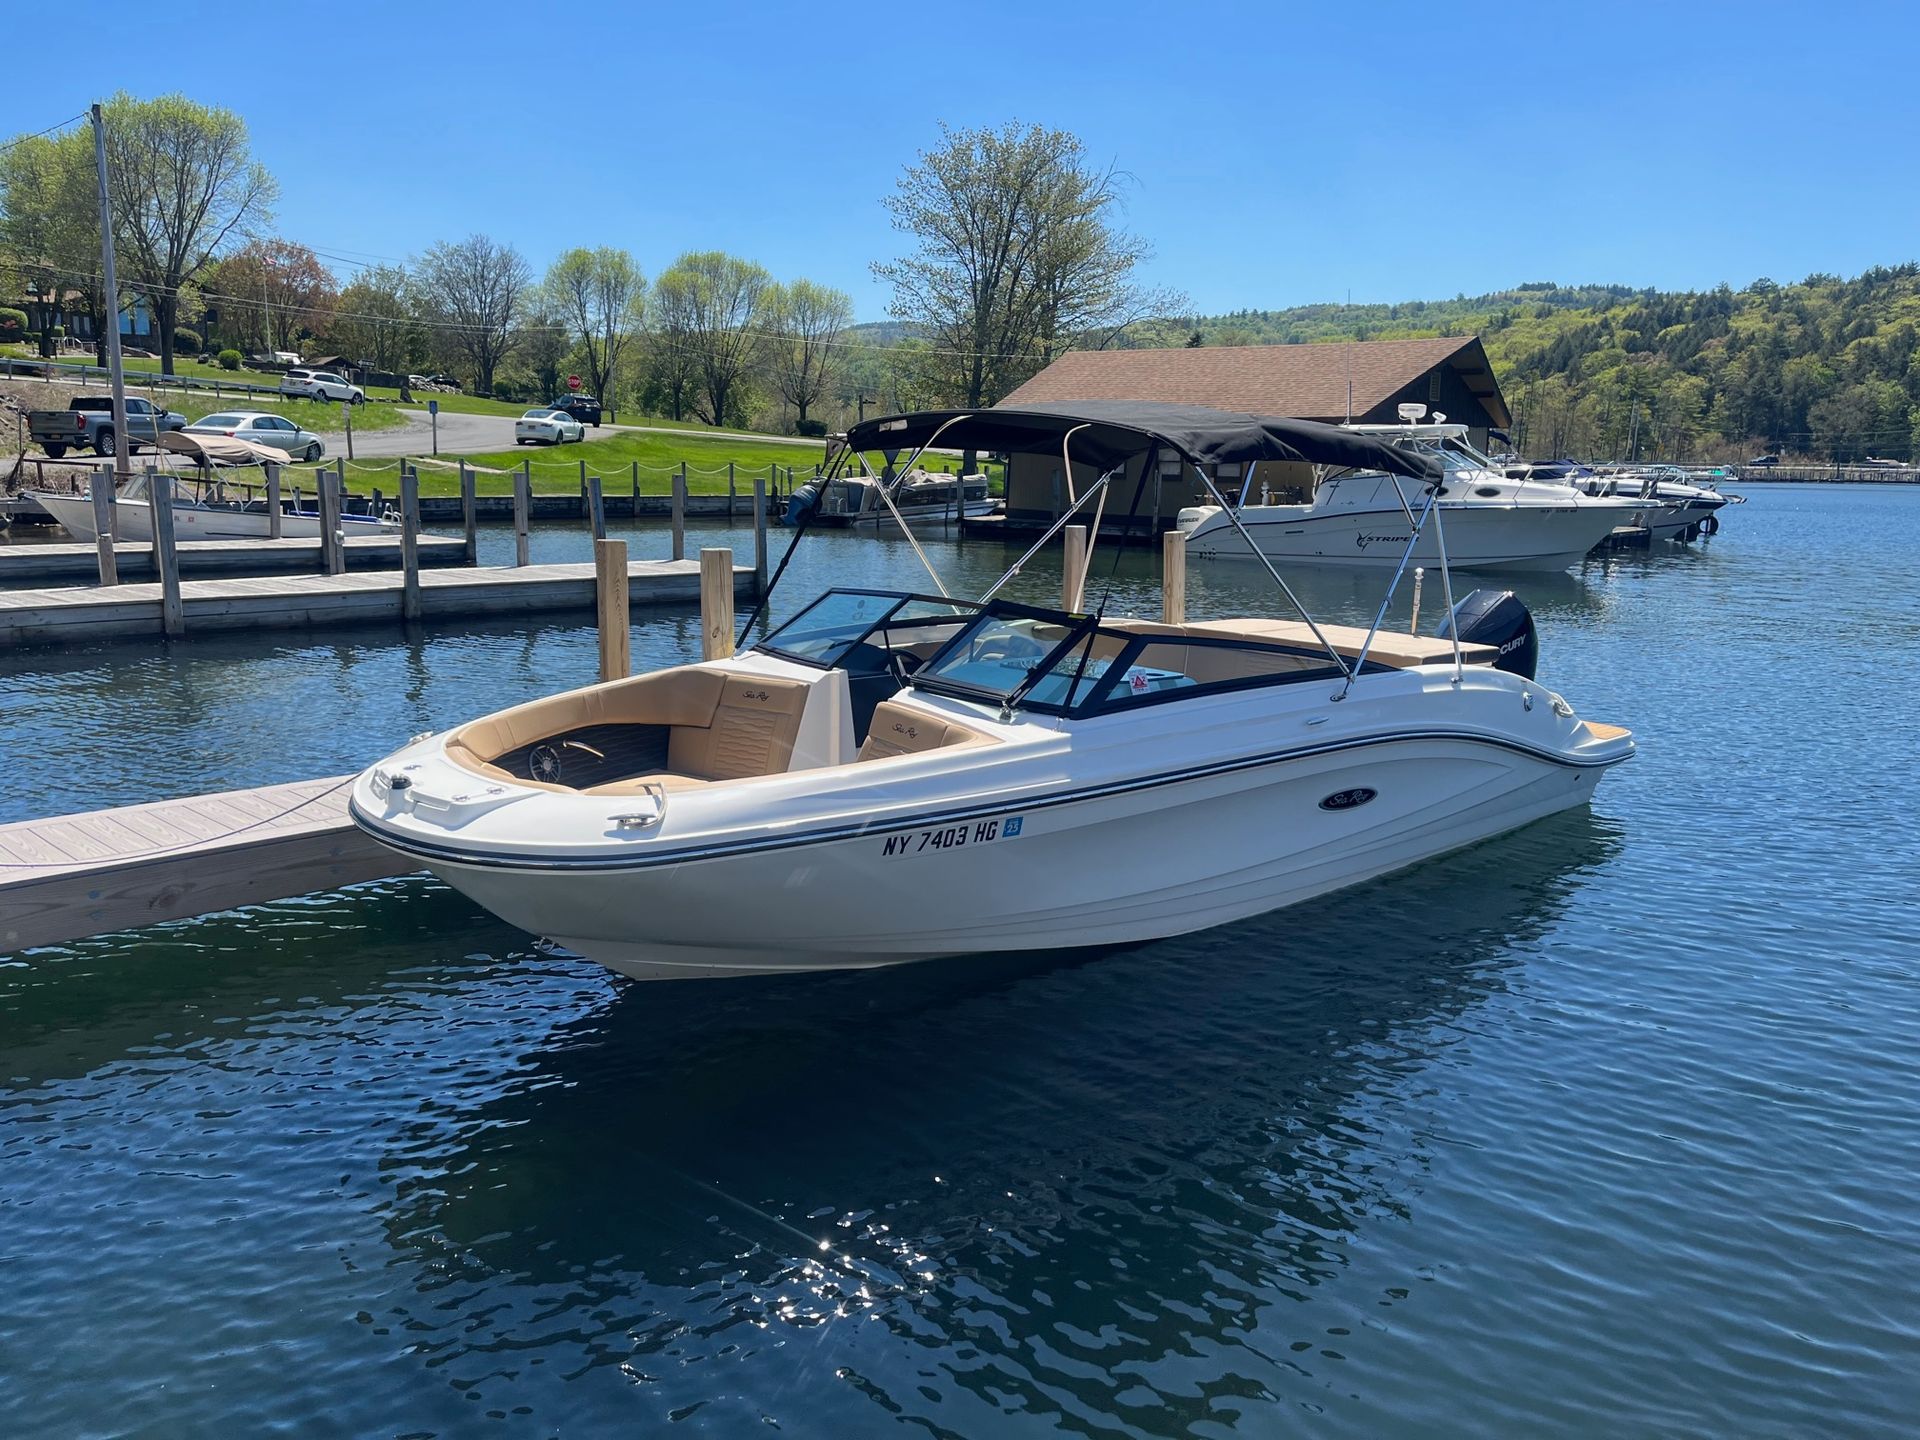 23' Sea Ray 210 with outboard